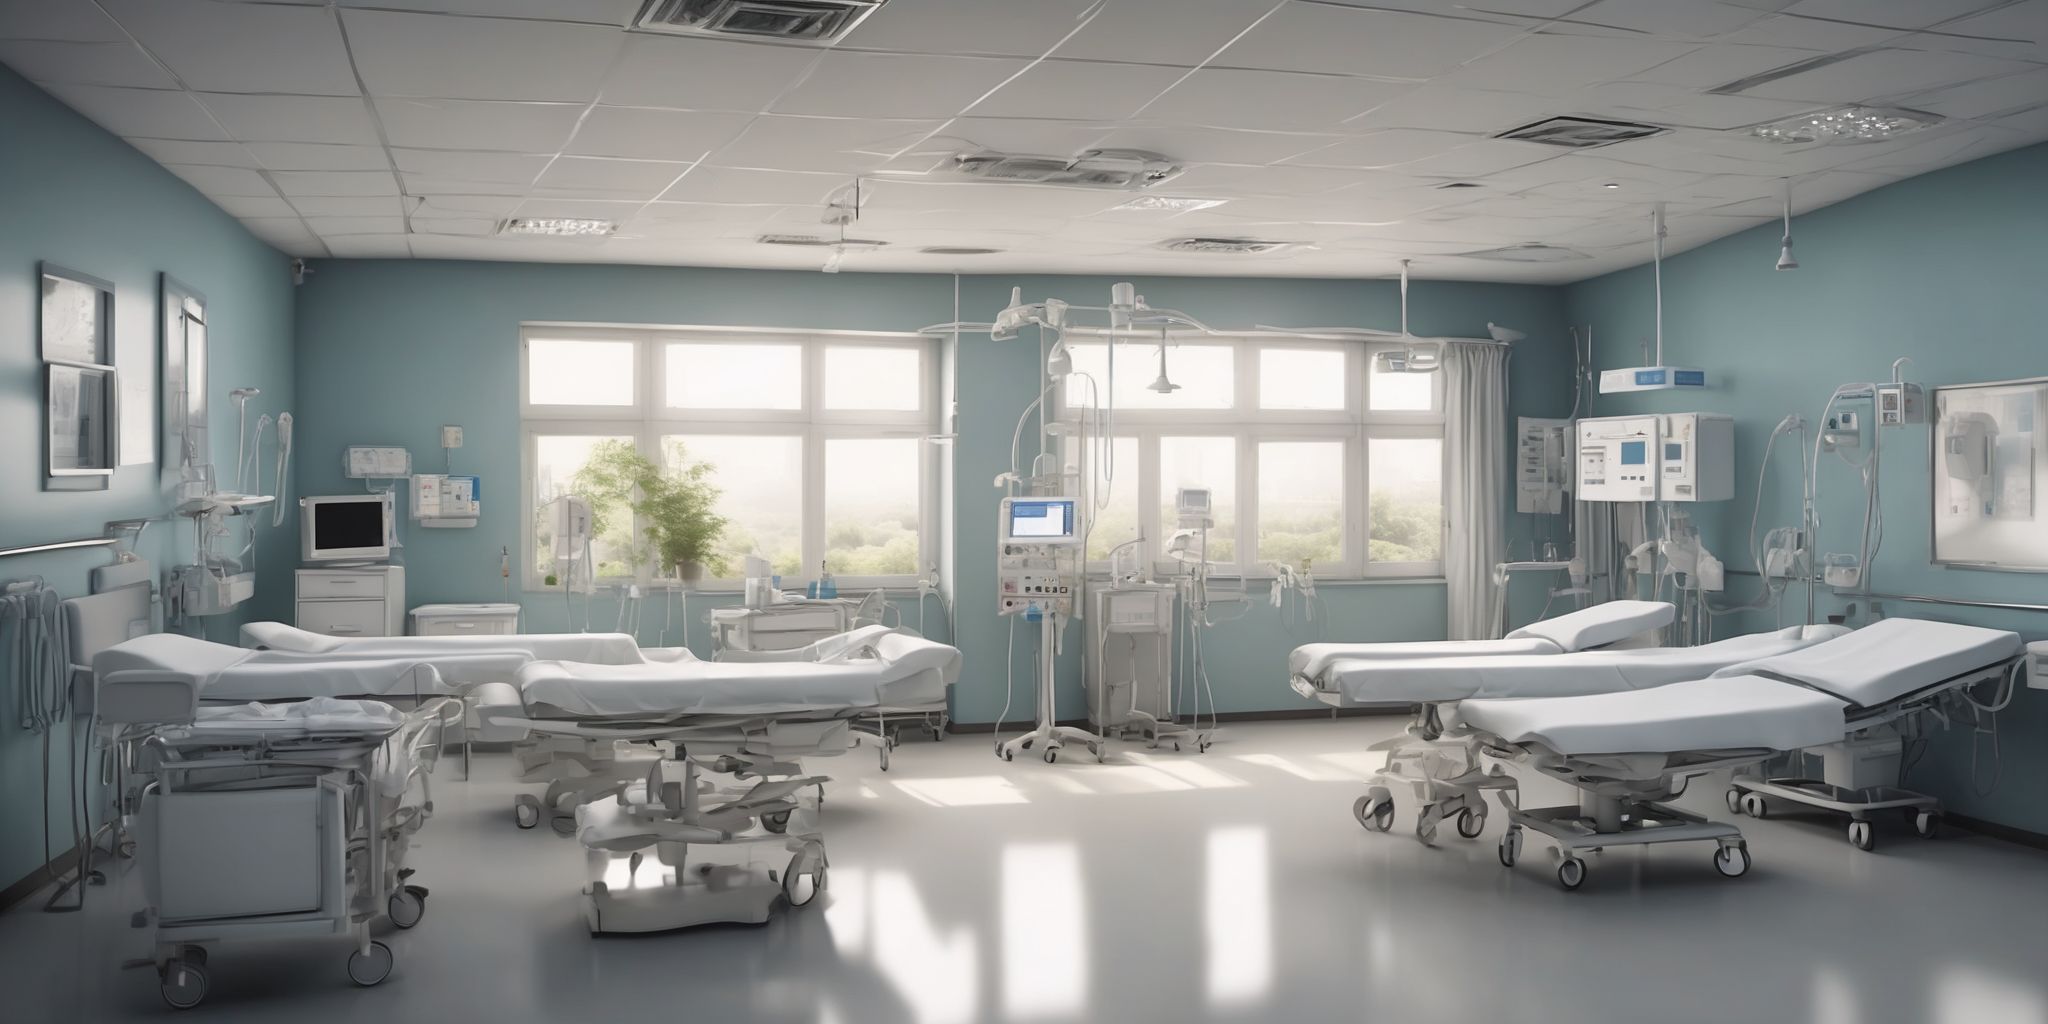 Hospital  in realistic, photographic style